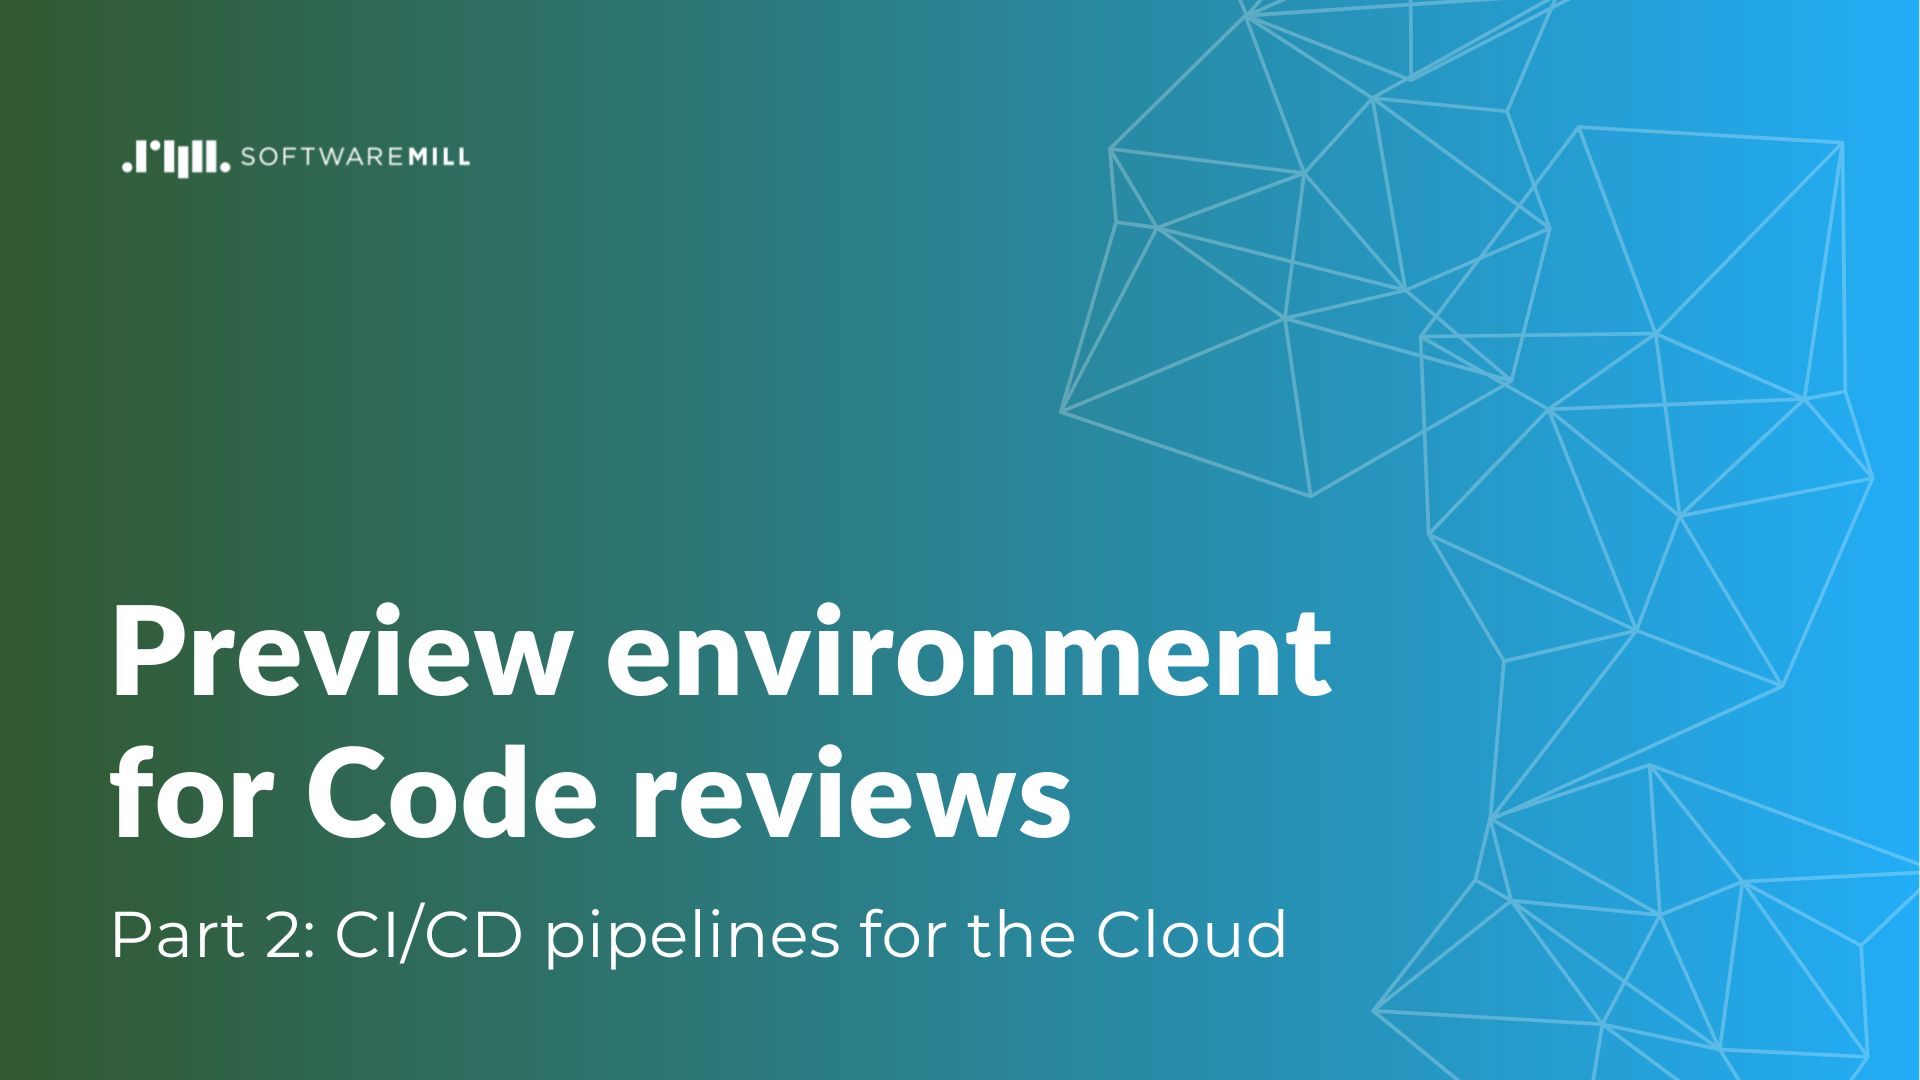 Preview environment for Code reviews, part 2: CI/CD pipelines for the Cloud webp image